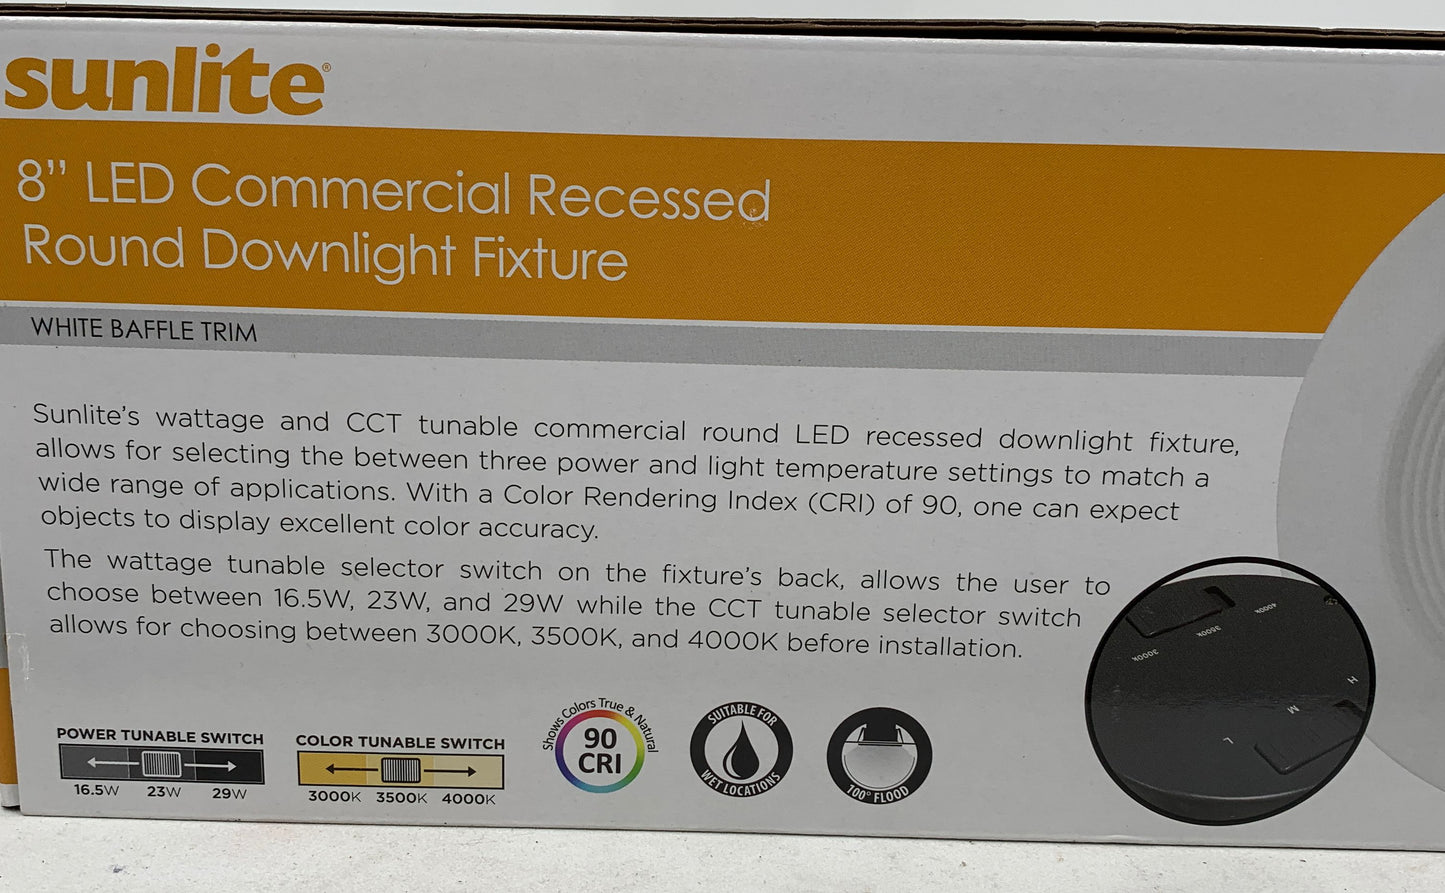 Sunlite Color & Power Tunable LED Commercial Recessed Round Downlight Fixture